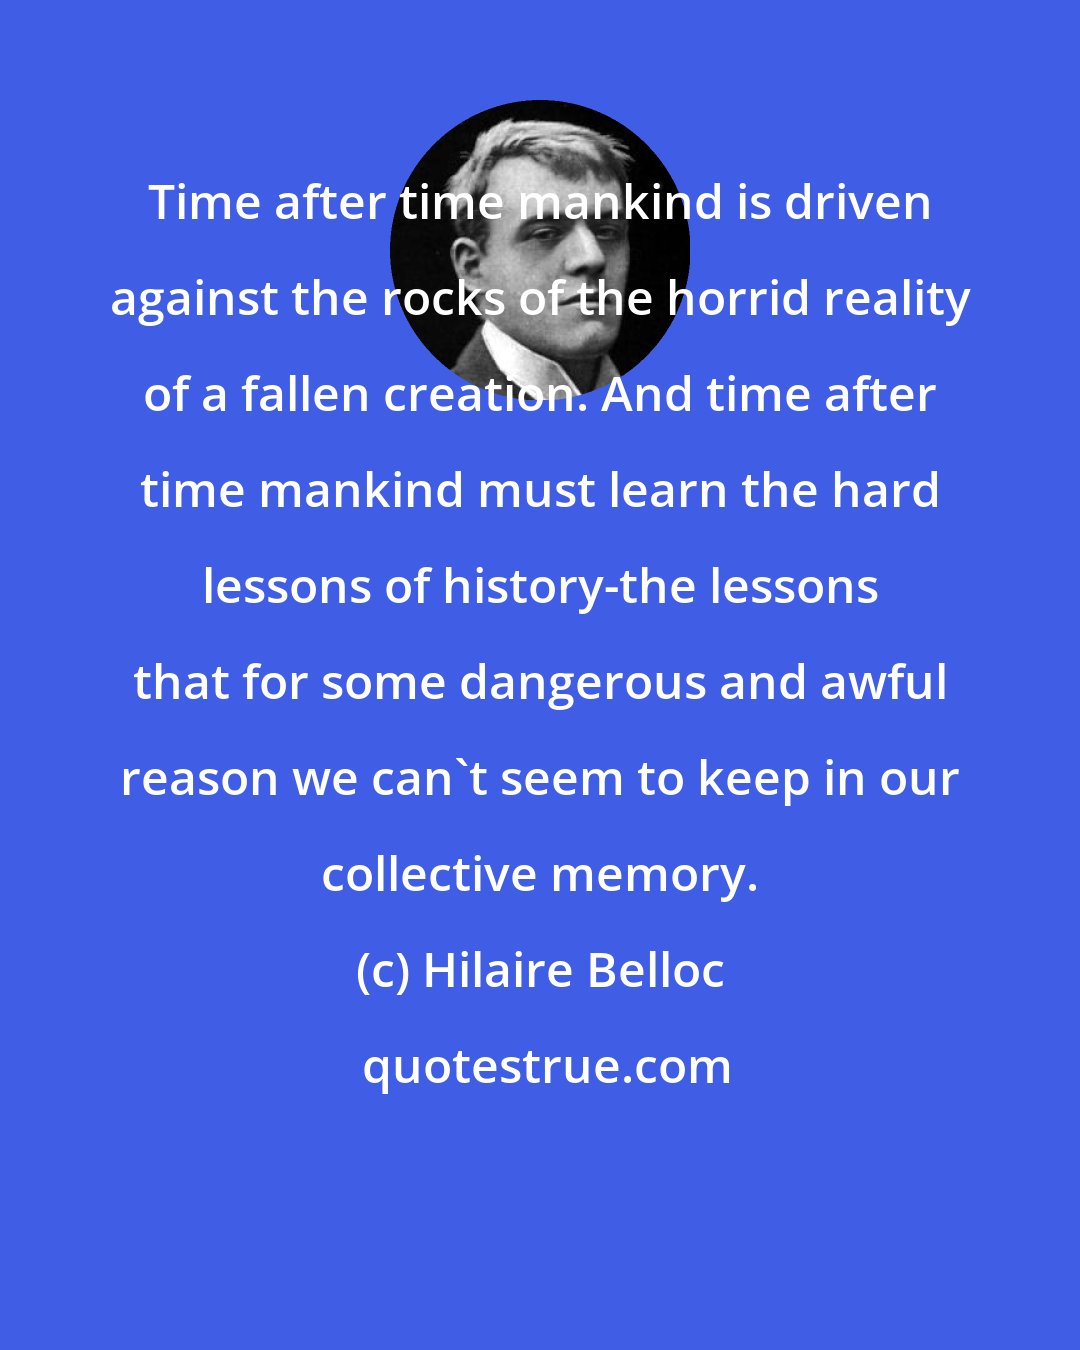 Hilaire Belloc: Time after time mankind is driven against the rocks of the horrid reality of a fallen creation. And time after time mankind must learn the hard lessons of history-the lessons that for some dangerous and awful reason we can't seem to keep in our collective memory.